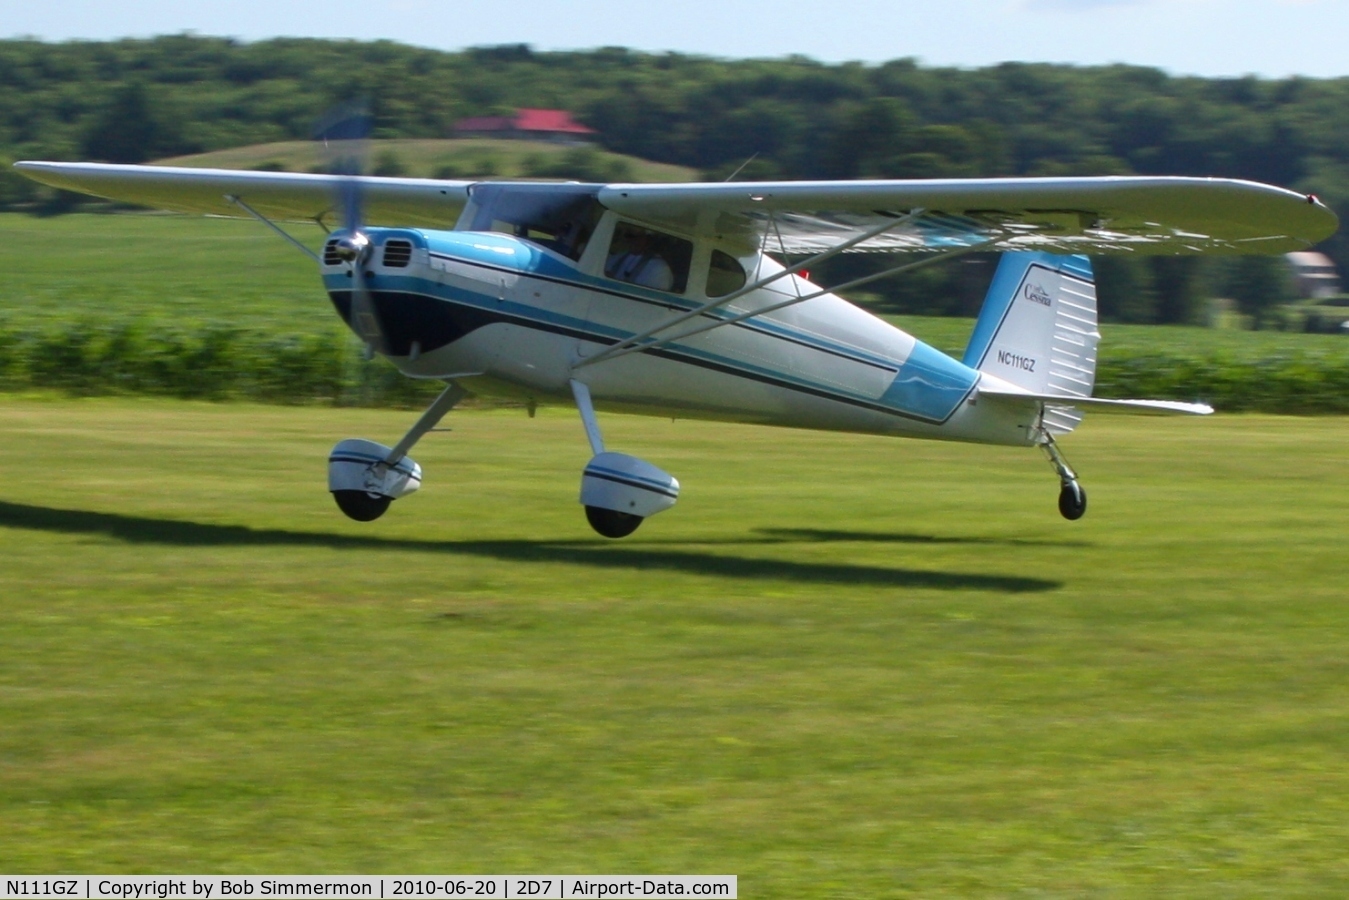 N111GZ, Cessna 140 C/N 14756, Arriving at the Father's Day breakfast fly-in, Beach City, Ohio.